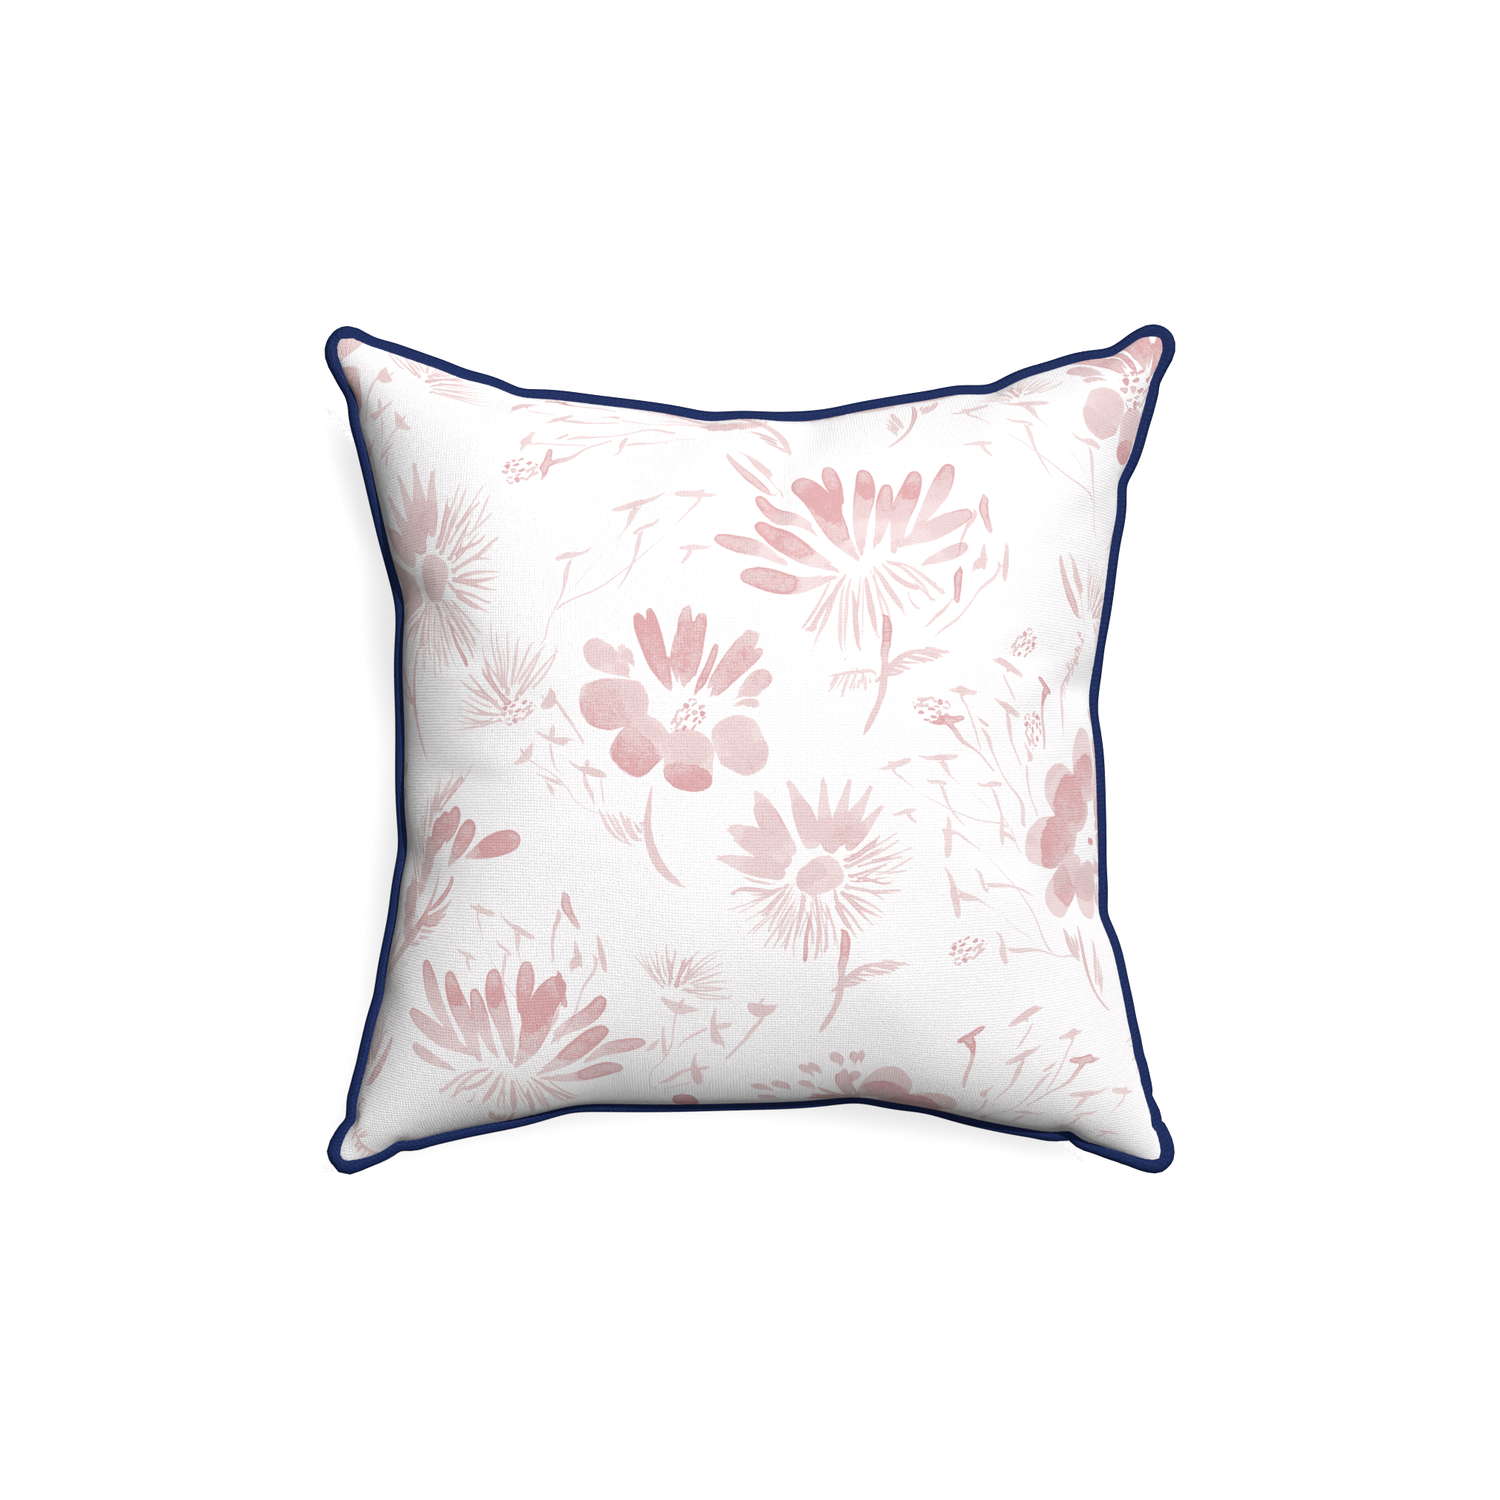 18-square blake custom pillow with midnight piping on white background